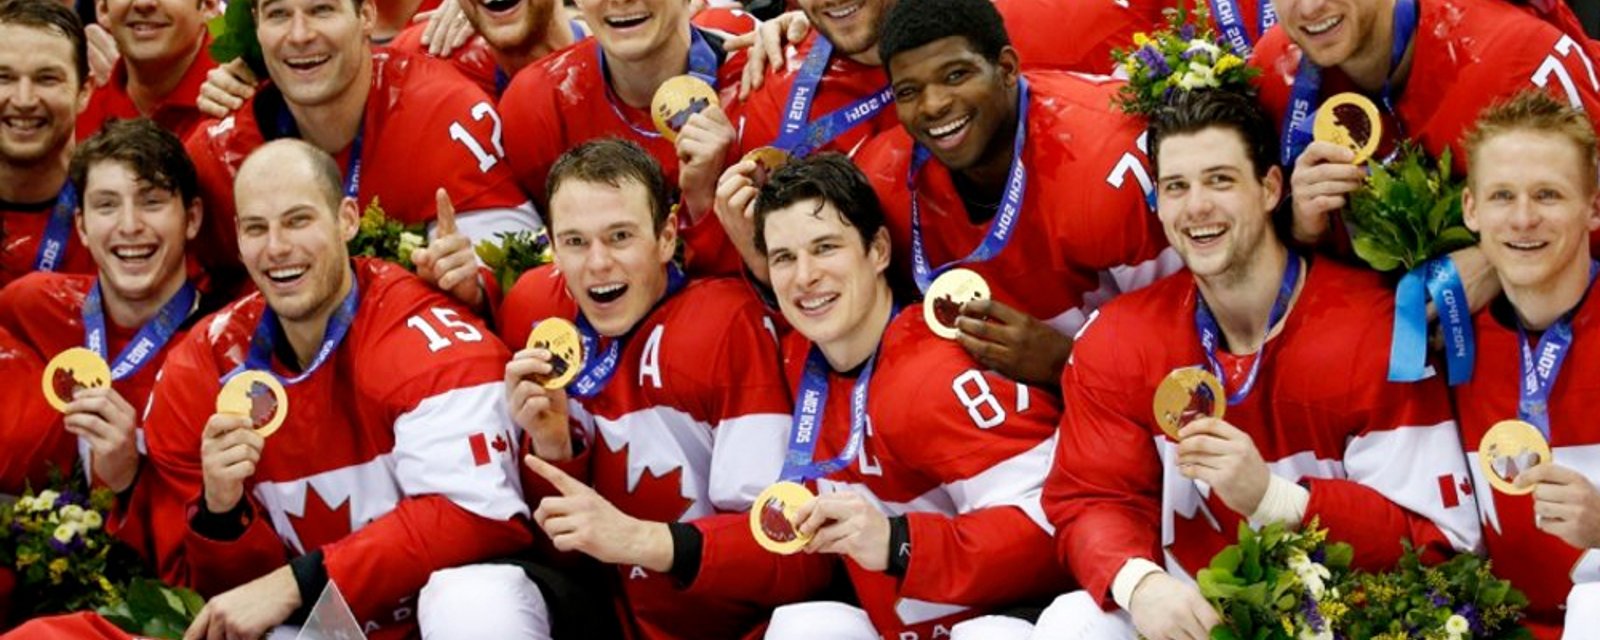 Report: NHL players to participate in 2022 and 2026 Olympics